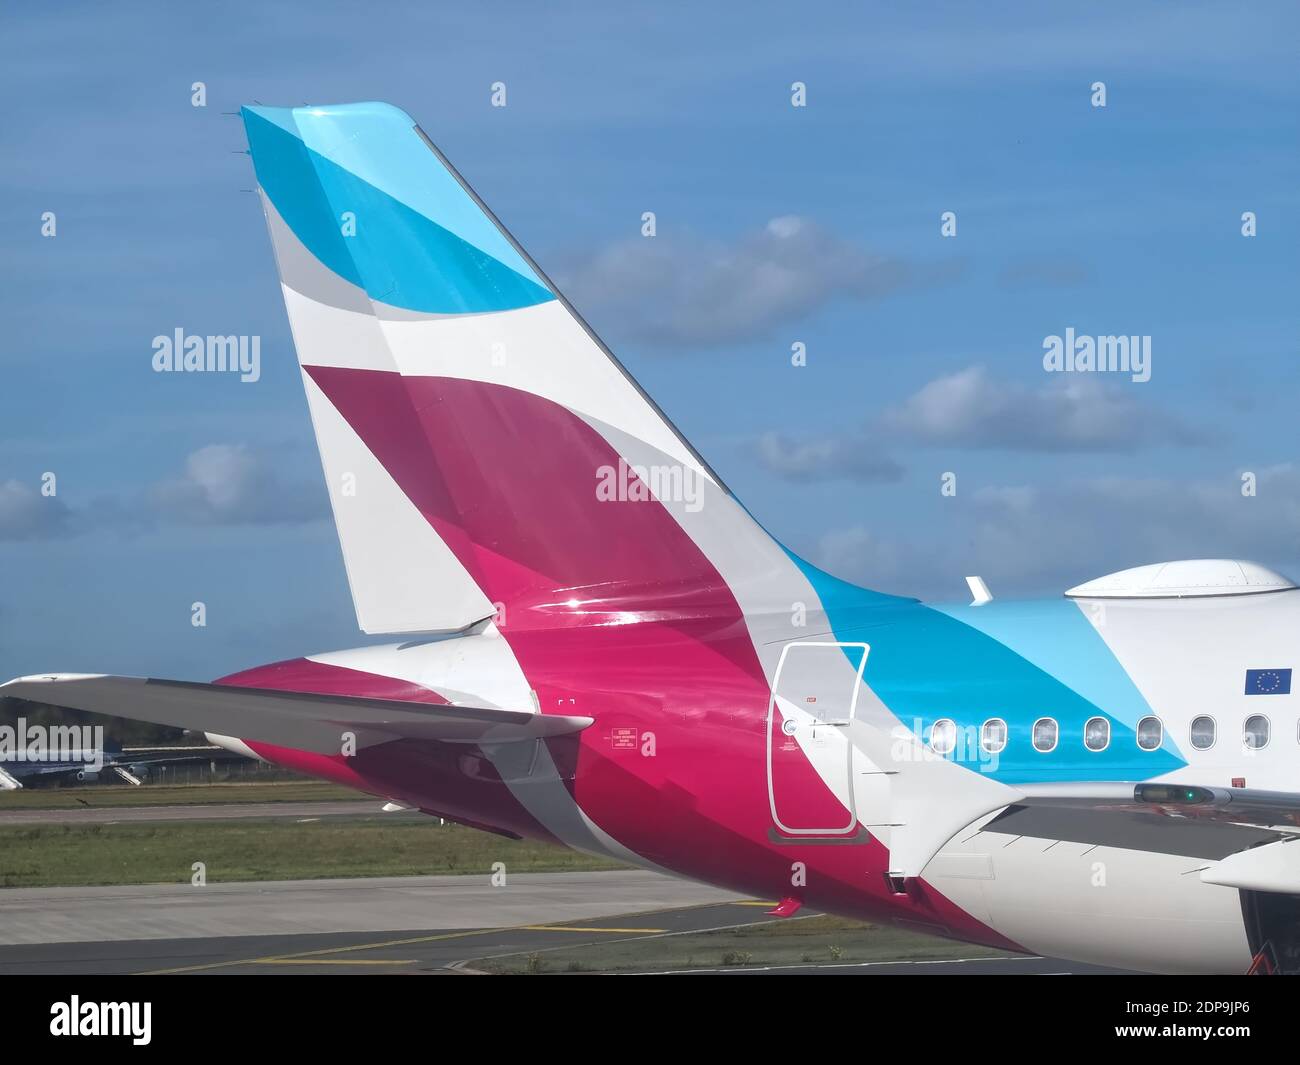 Eurowings airplane at Faro airport in park position Stock Photo